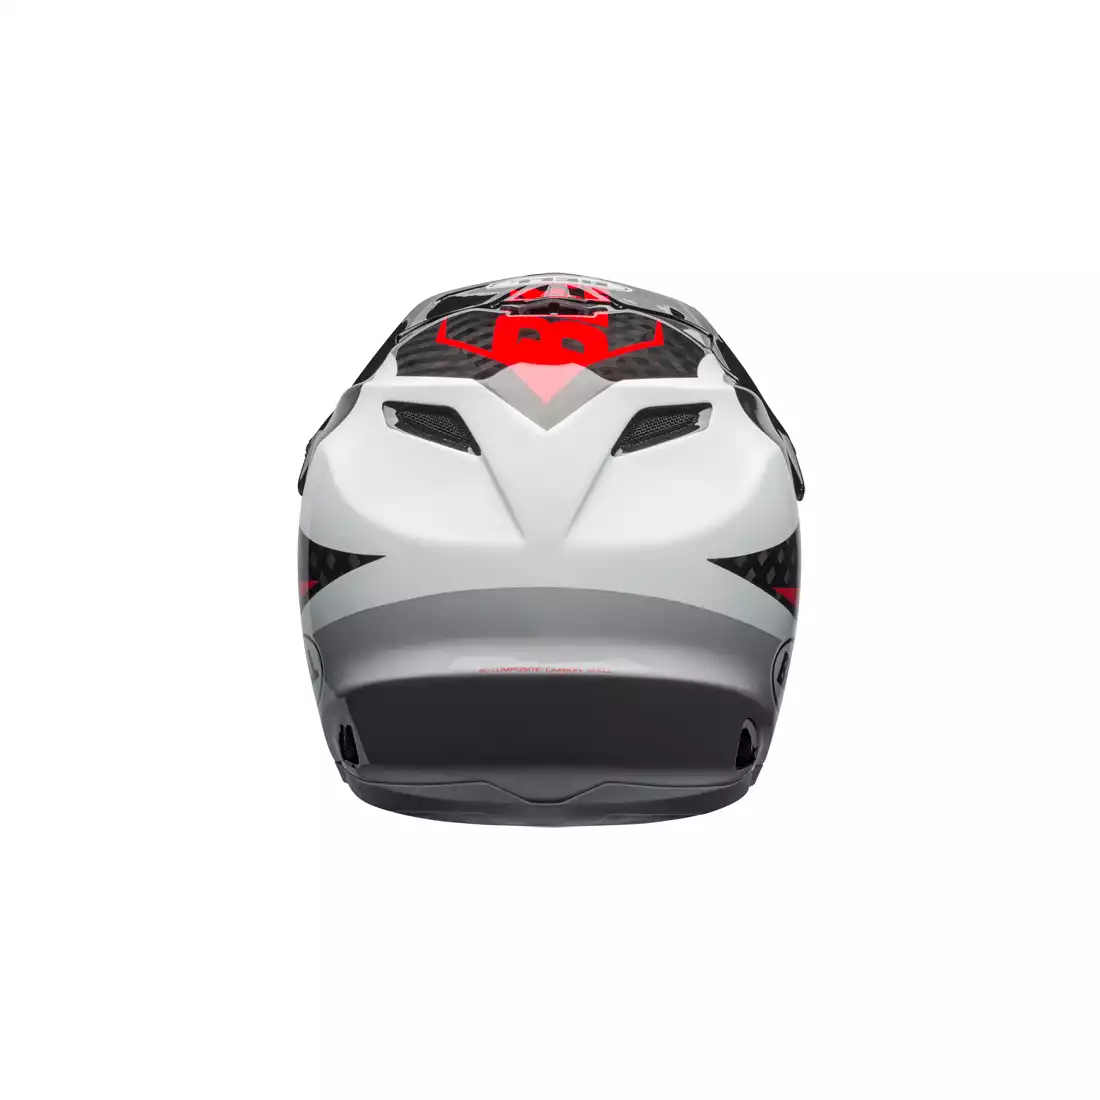 Kask rowerowy full face BELL FULL-9 CARBON gloss white black hibiscus rio 